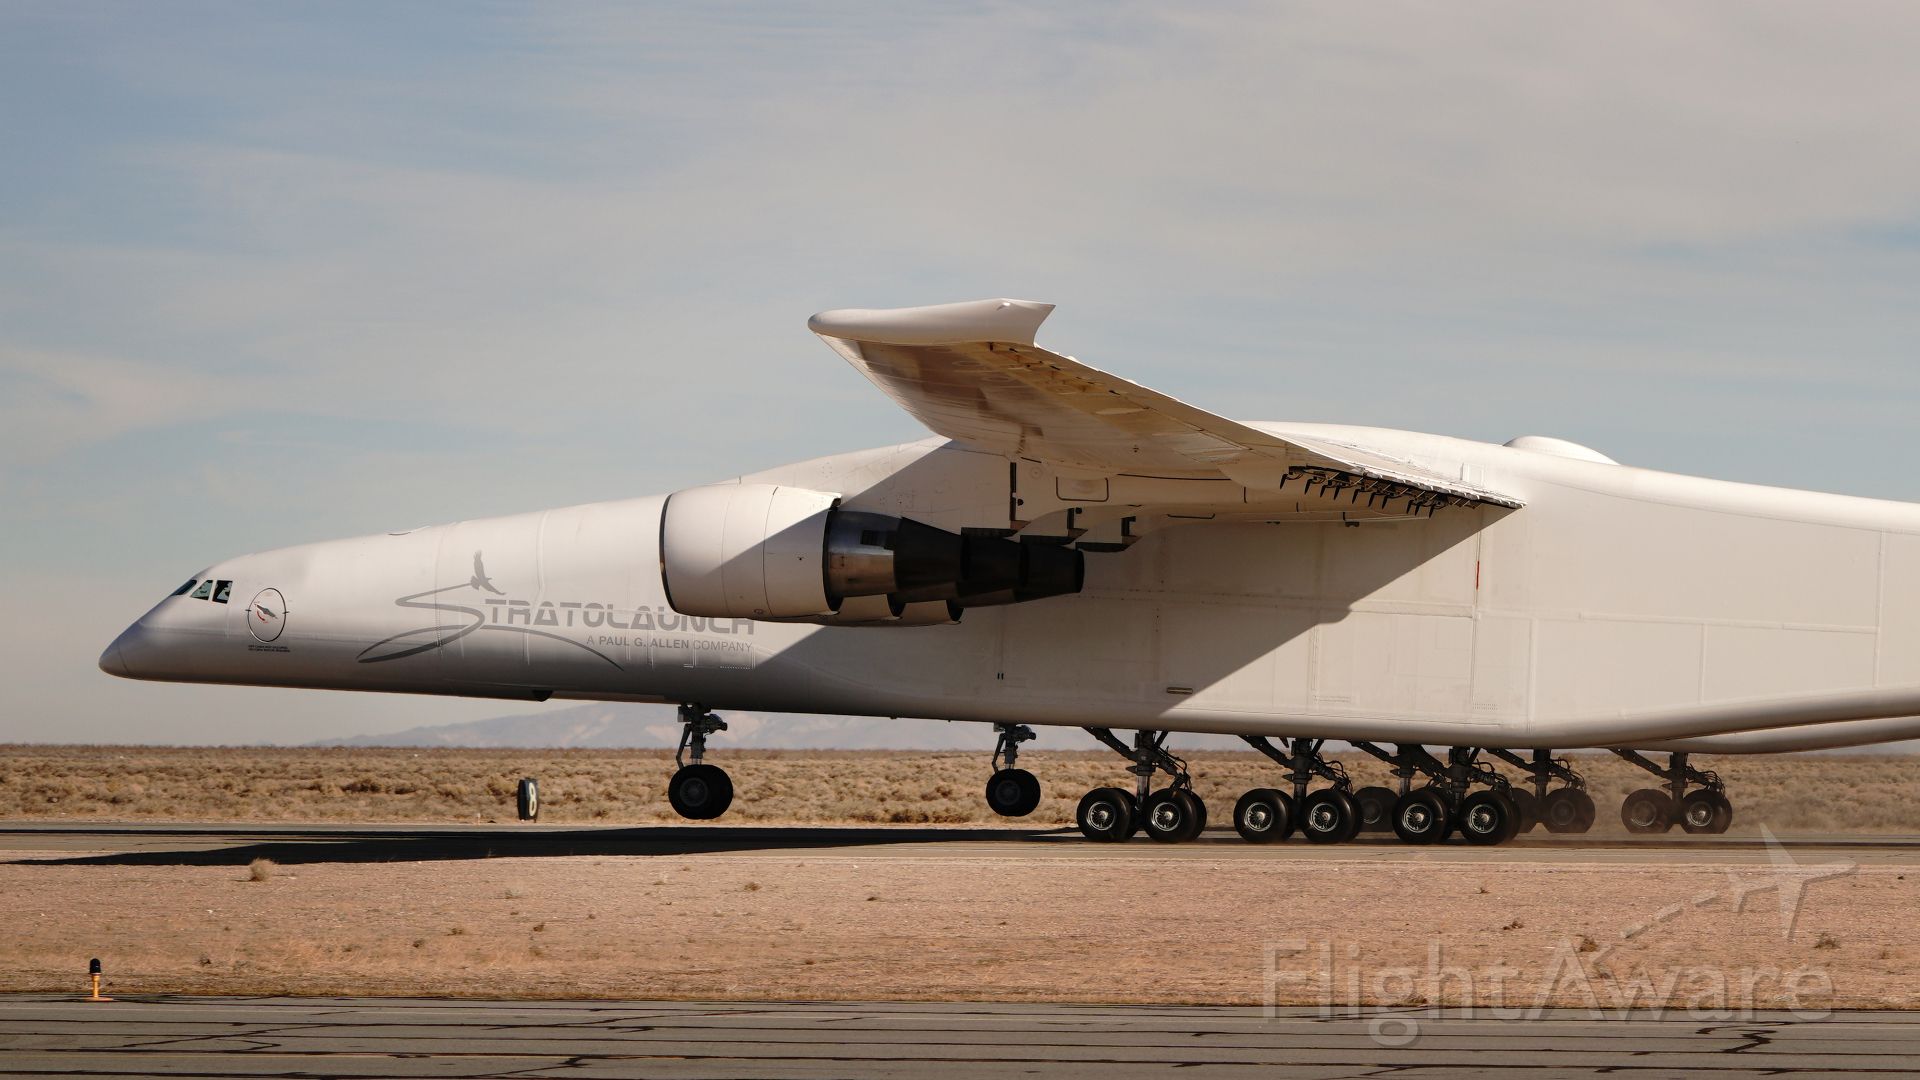 Eurocopter AS-350 AStar (N351SL) - Stratolaunch with its nose wheels off the ground during January 2019 high-speed taxi testing.